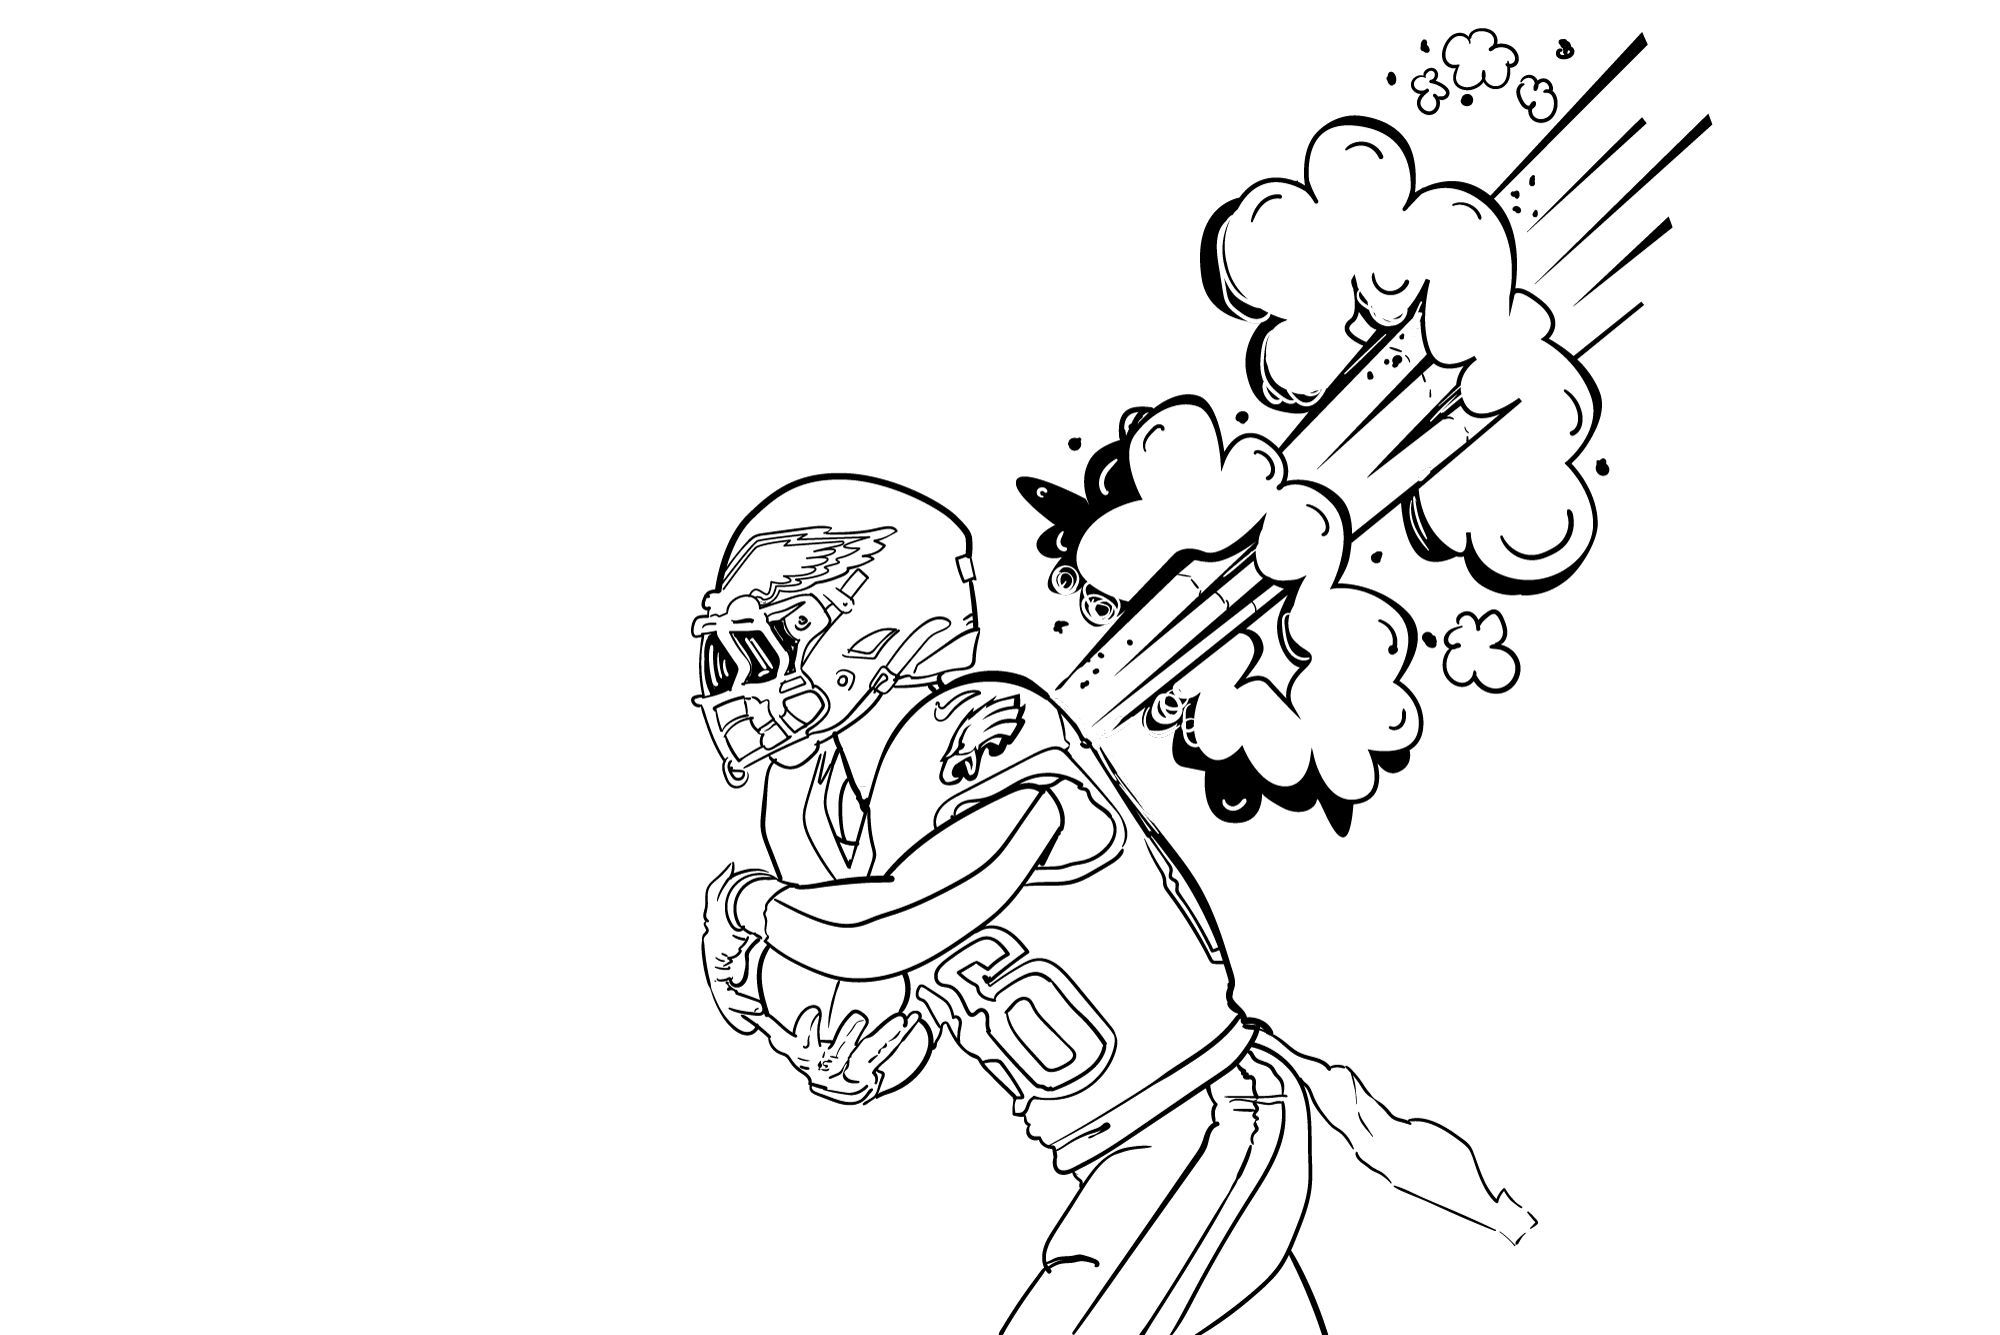 Eagles coloring pages are trending we made some new ones you can download